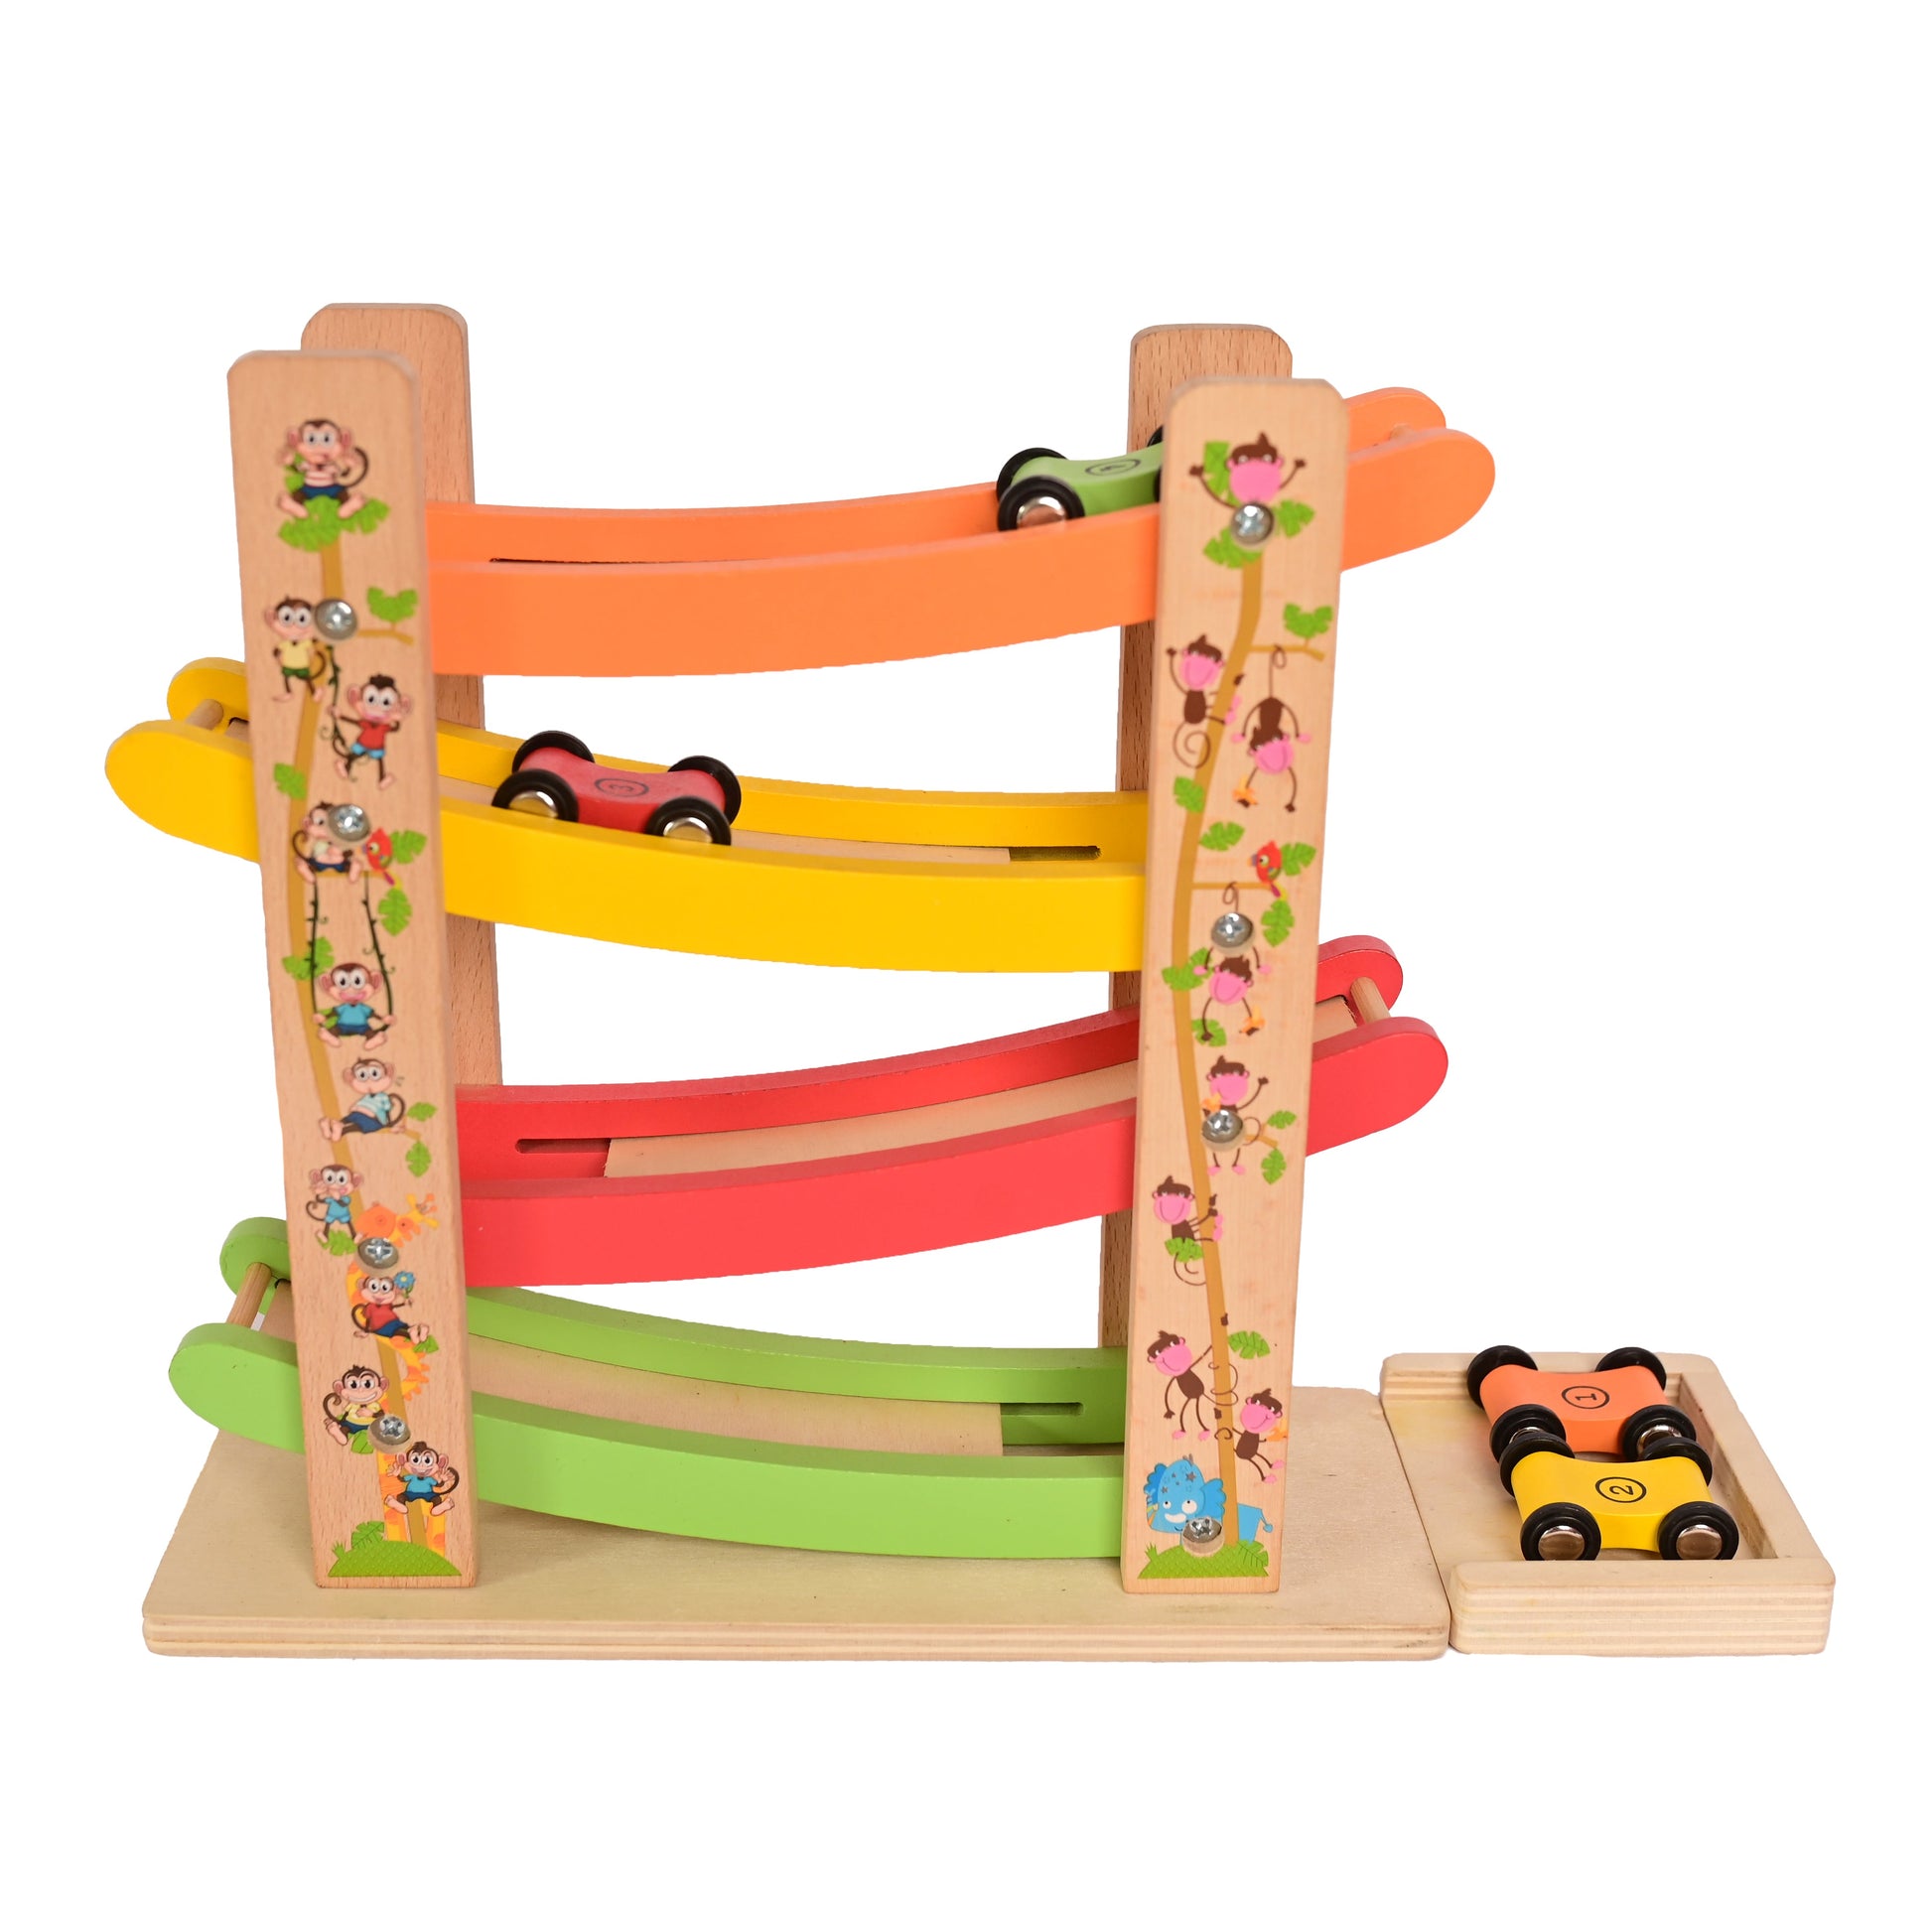 Buy Wooden Ramp Racer Toy - Set of 4 Car Ramps, 4 Mini Cars & Race Track - SkilloToys.com